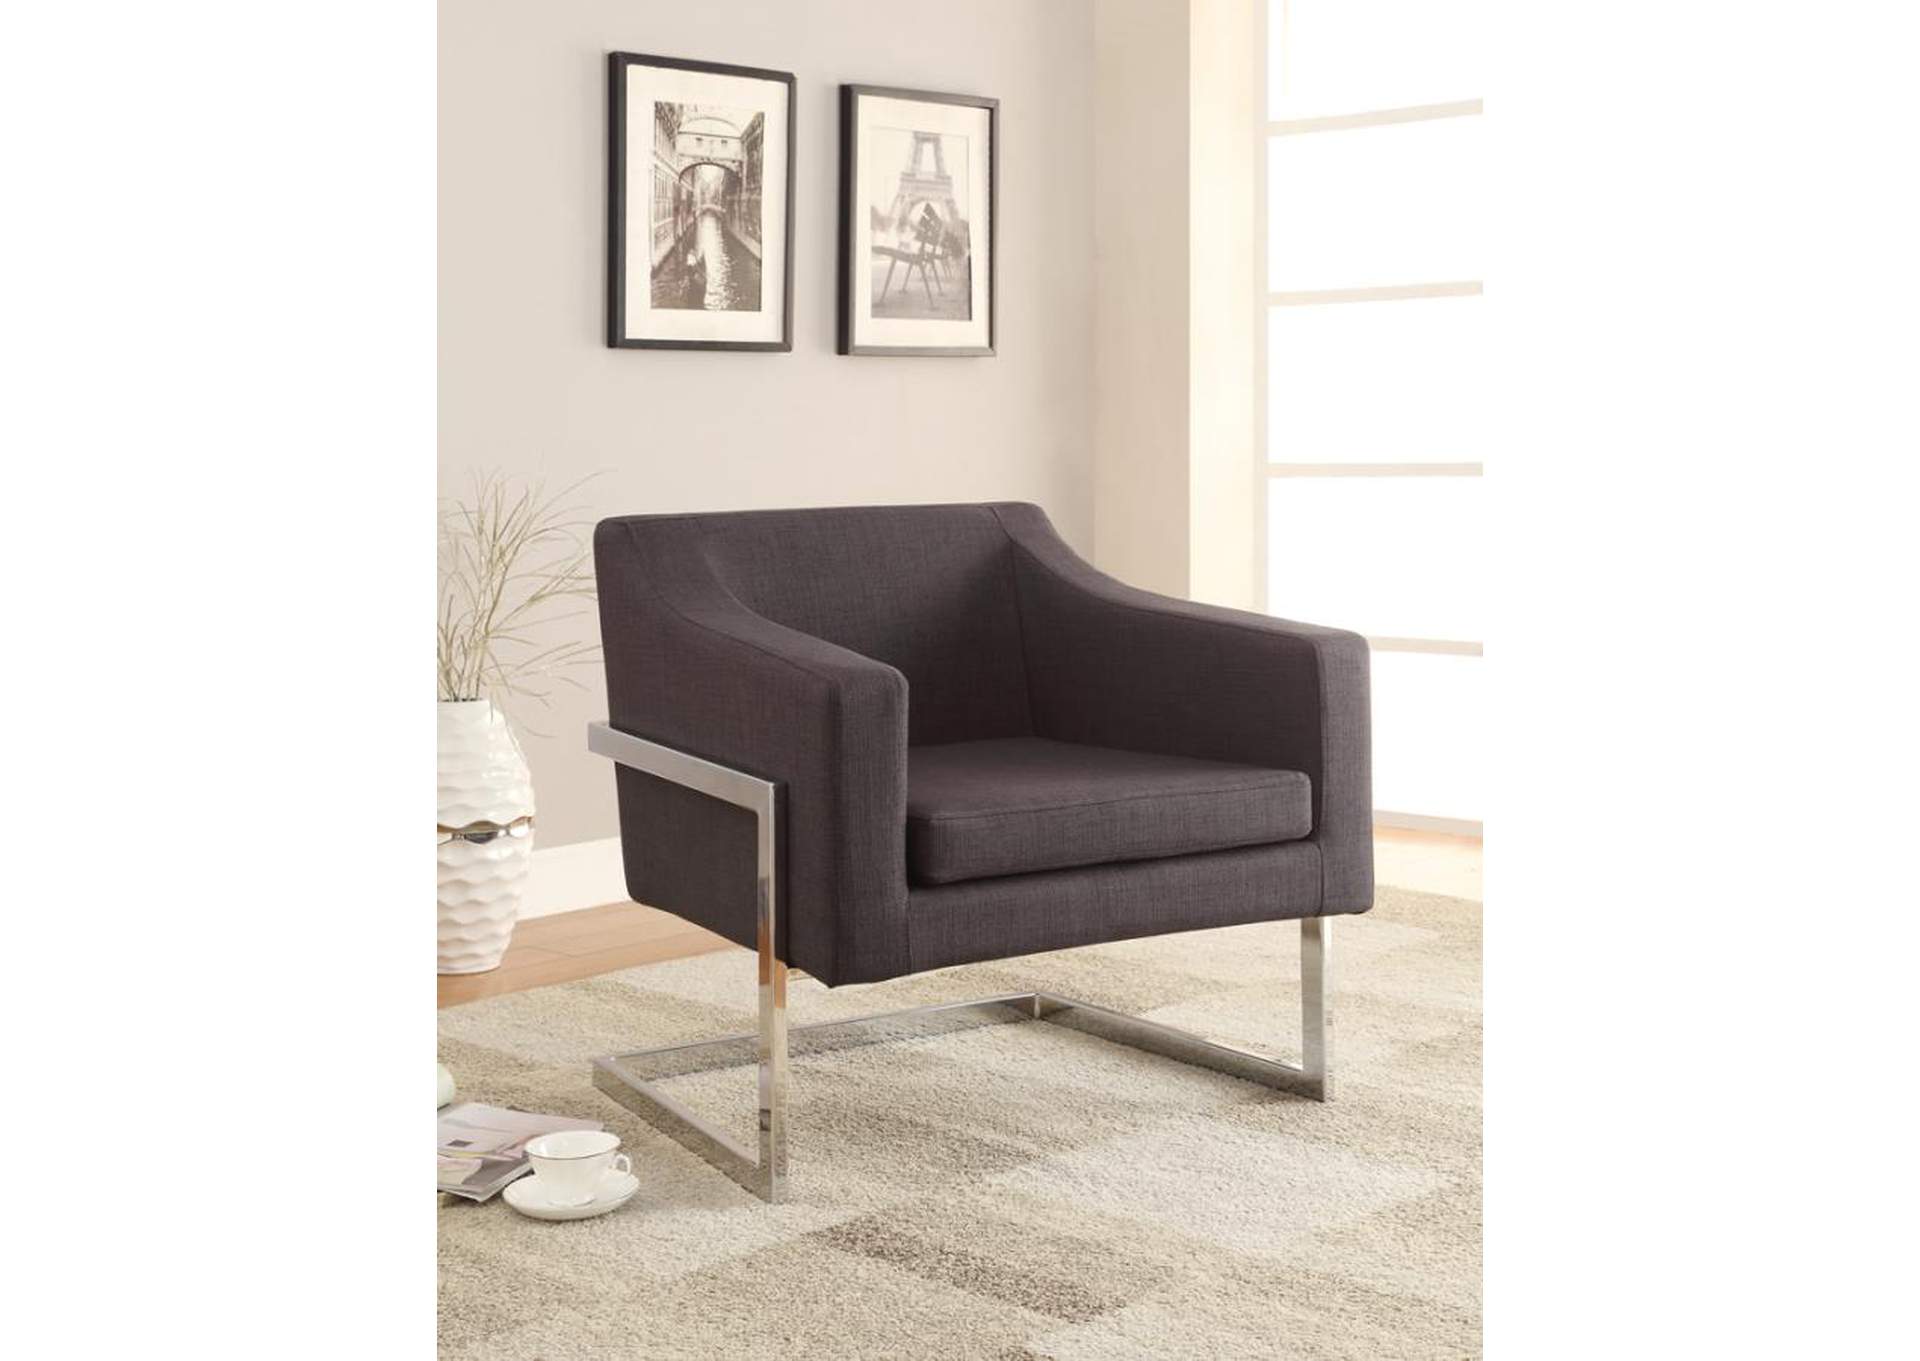 Chris Upholstered Accent Chair Chrome And Grey,Coaster Furniture